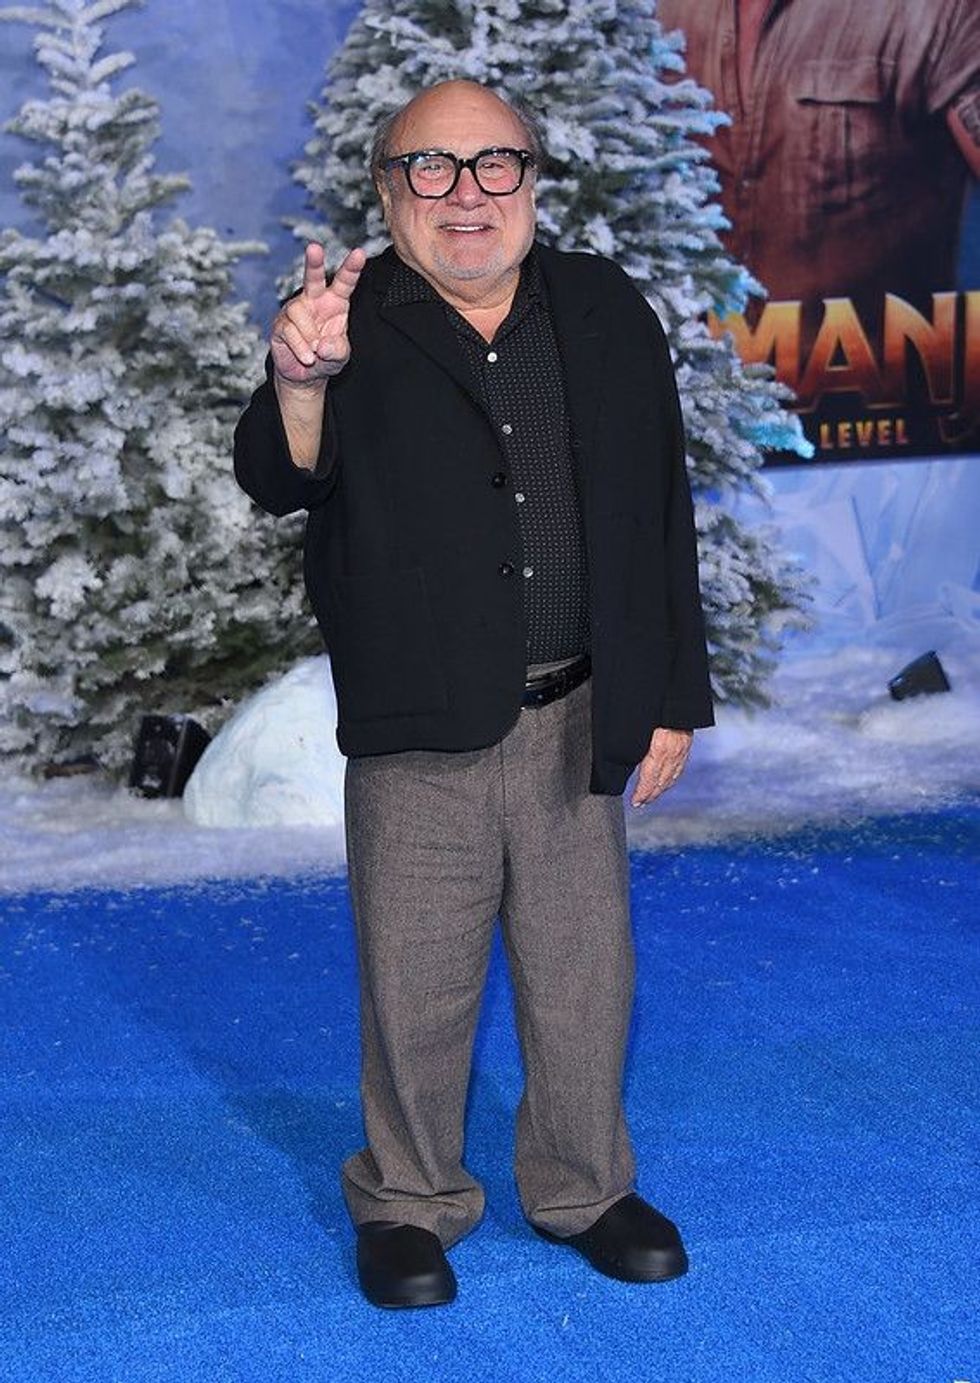 Read on to find some interesting Danny DeVito facts here on Kidadl!